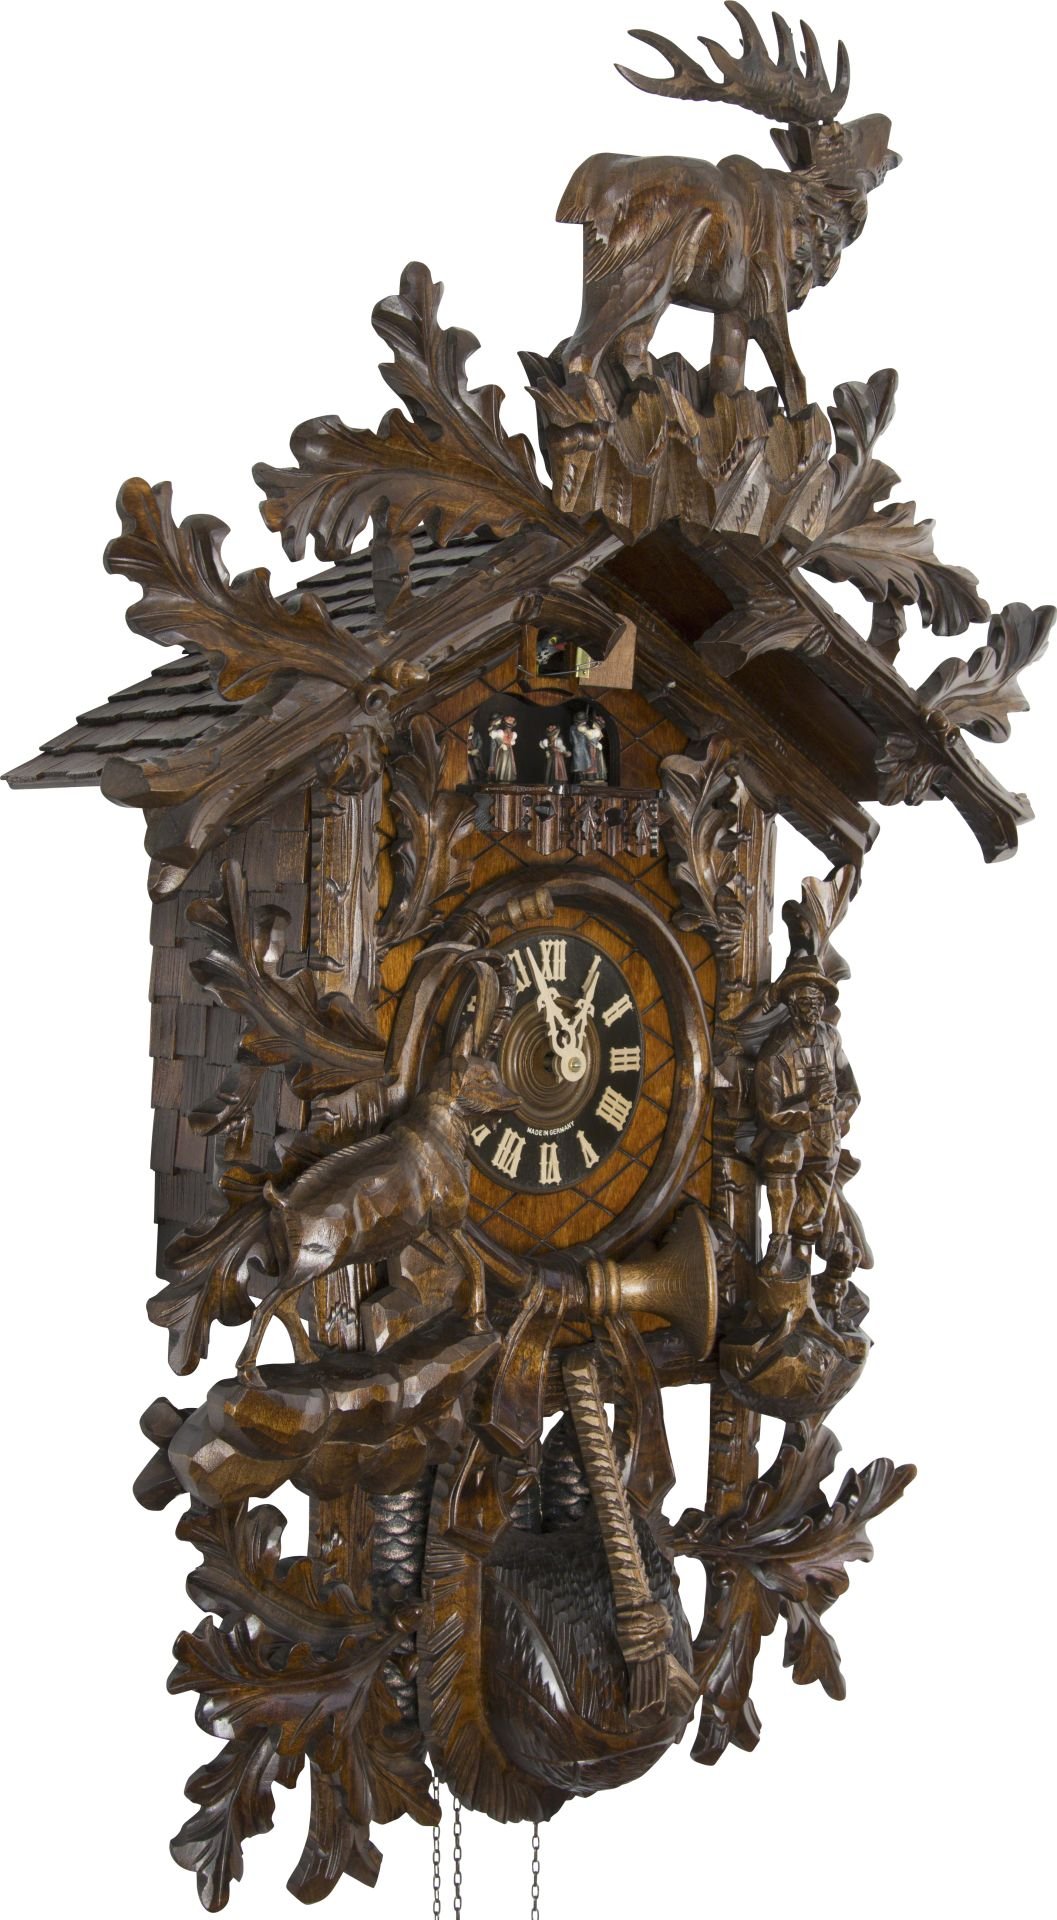 Cuckoo Clock Carved Style 8 Day Movement 90cm by August Schwer